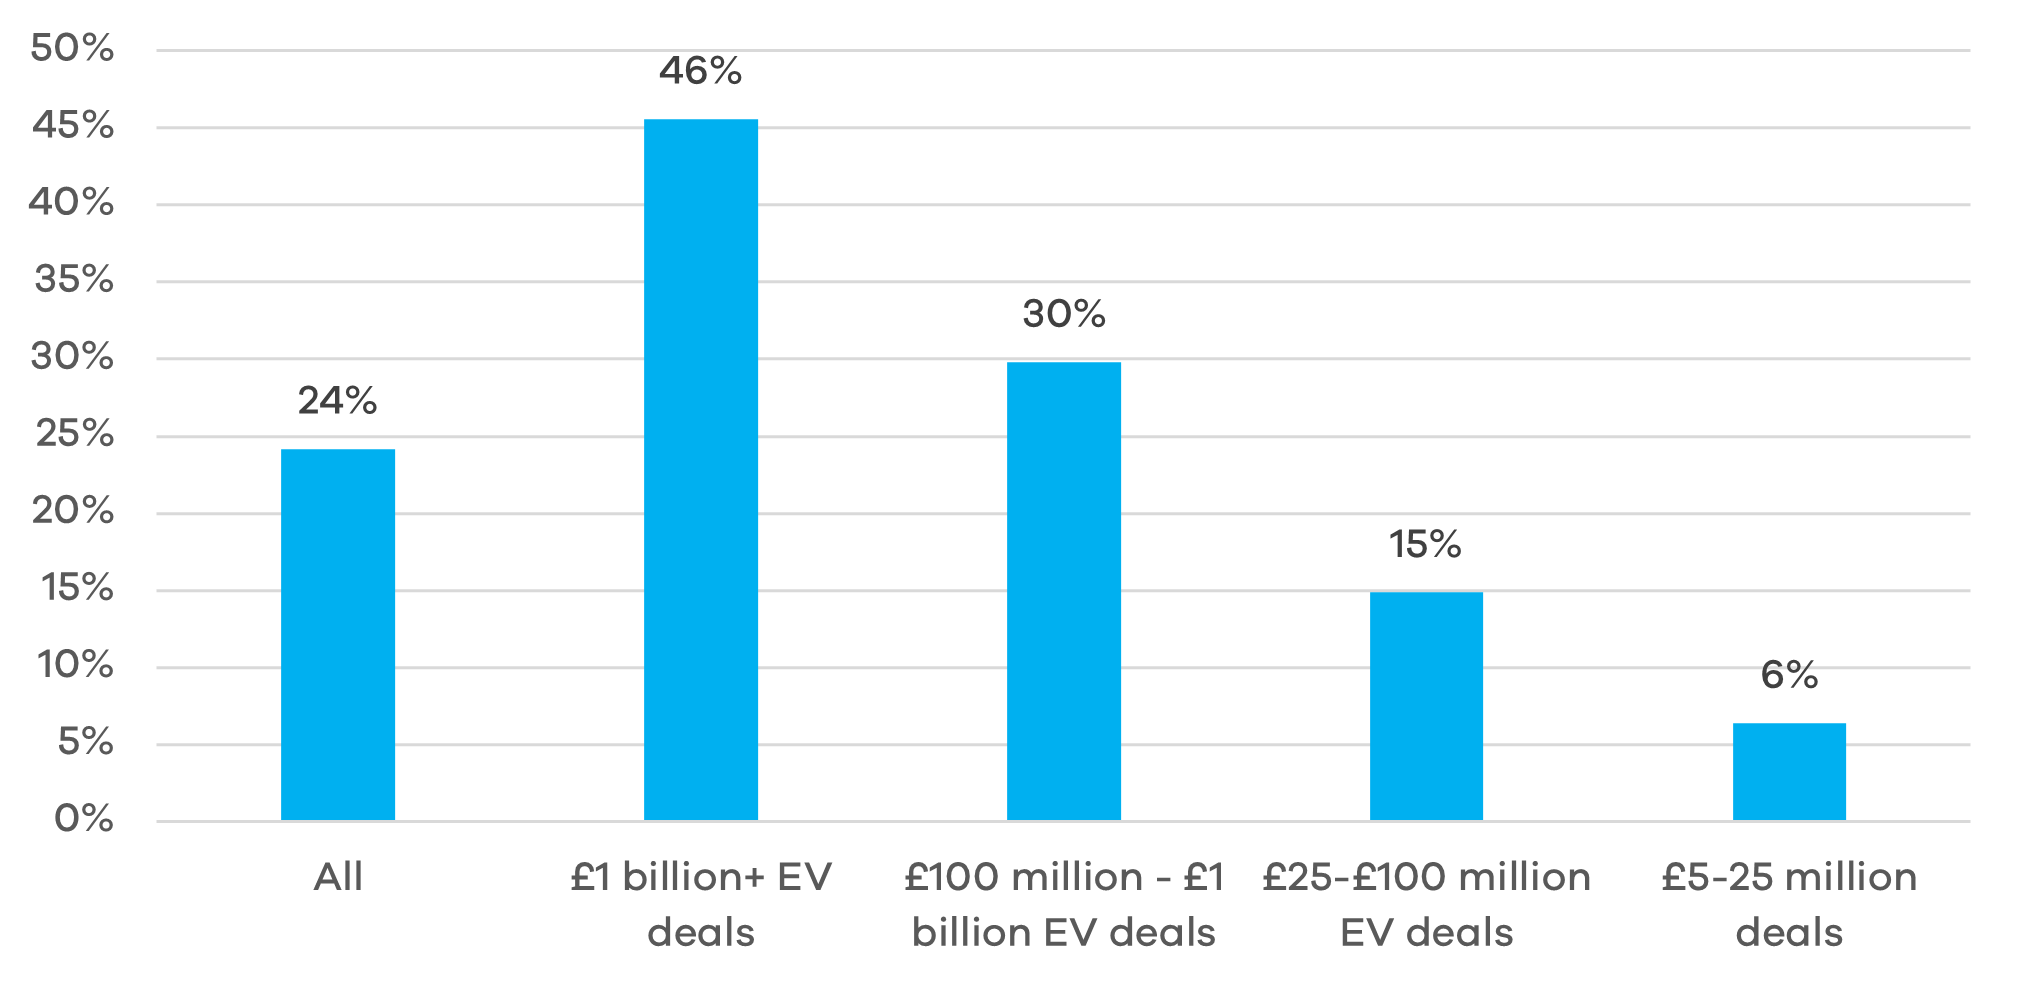 Bar chart showing the percentage of Private Equity by deal size. Deals above 1 billion pounds is the highest with 46%